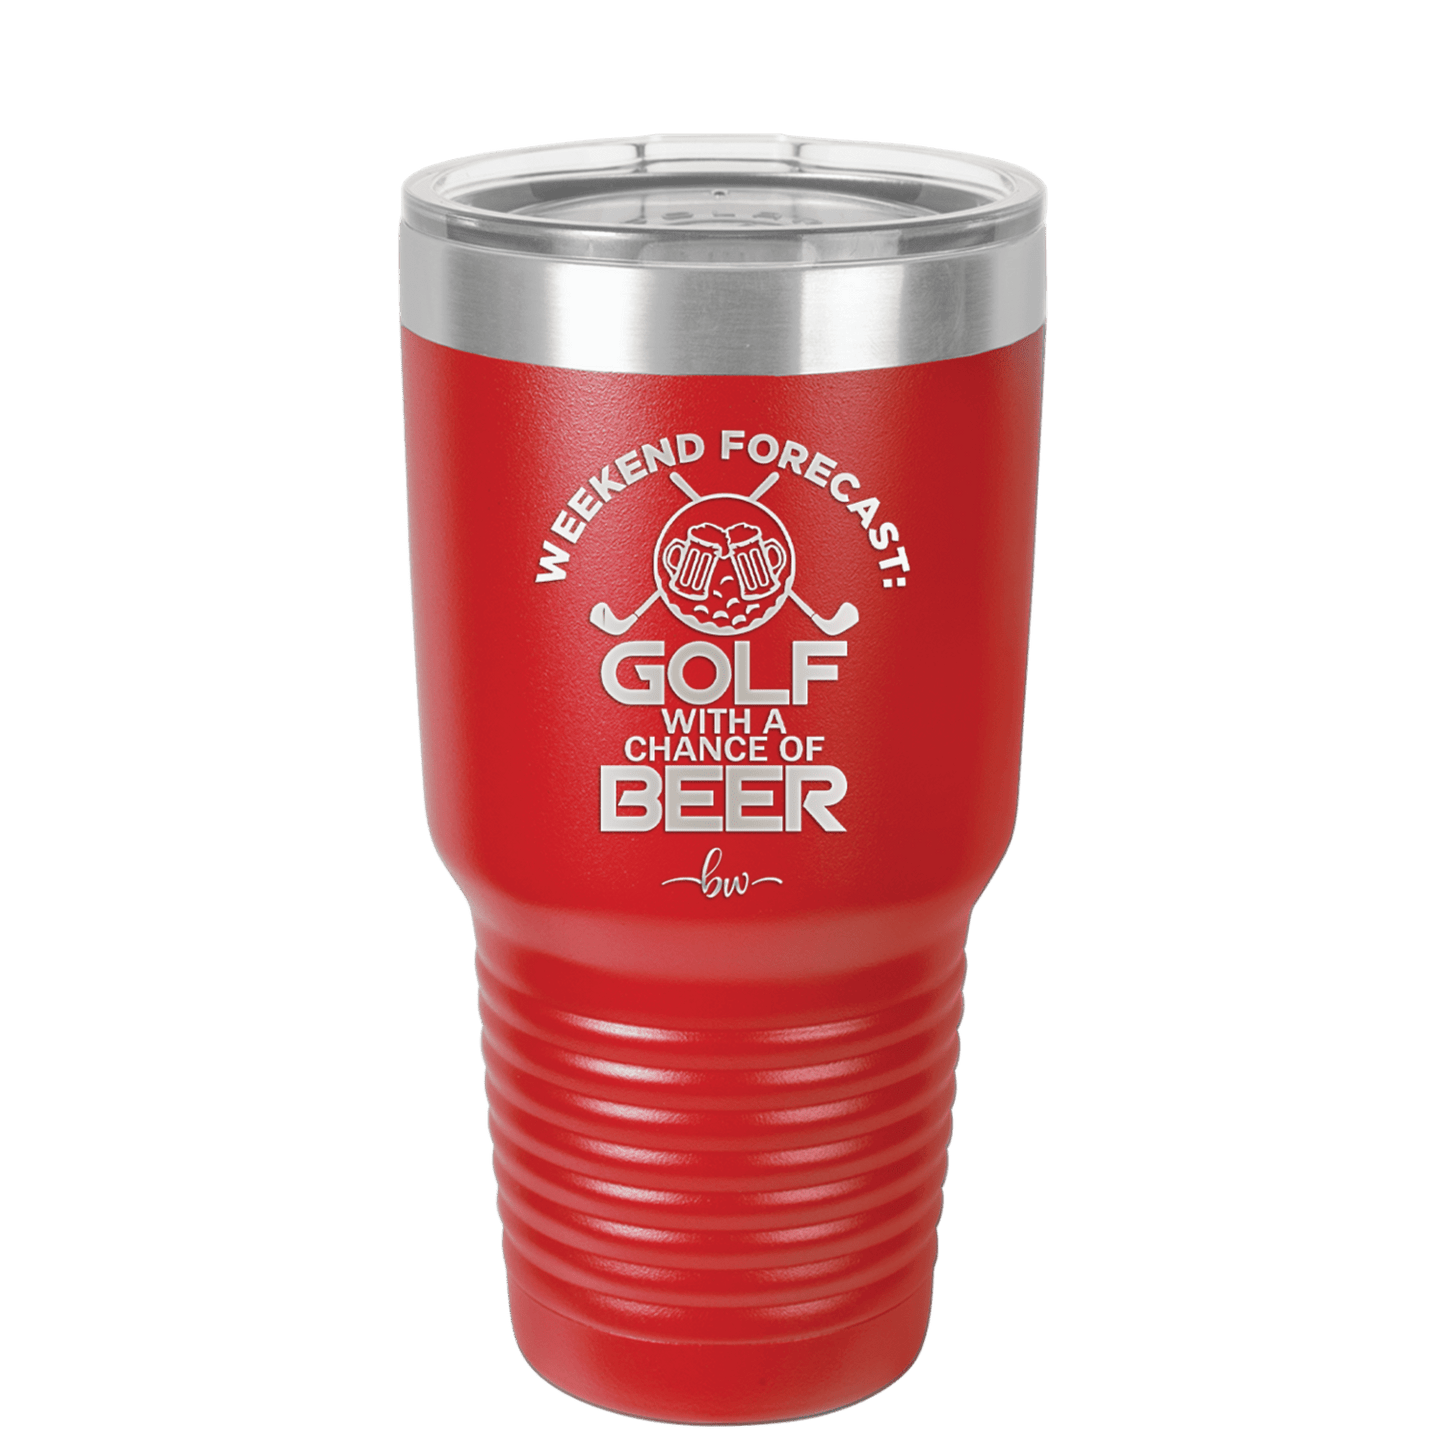 Weekend Forecast Golf with a Chance of Beer 2 - Laser Engraved Stainless Steel Drinkware - 1666 -